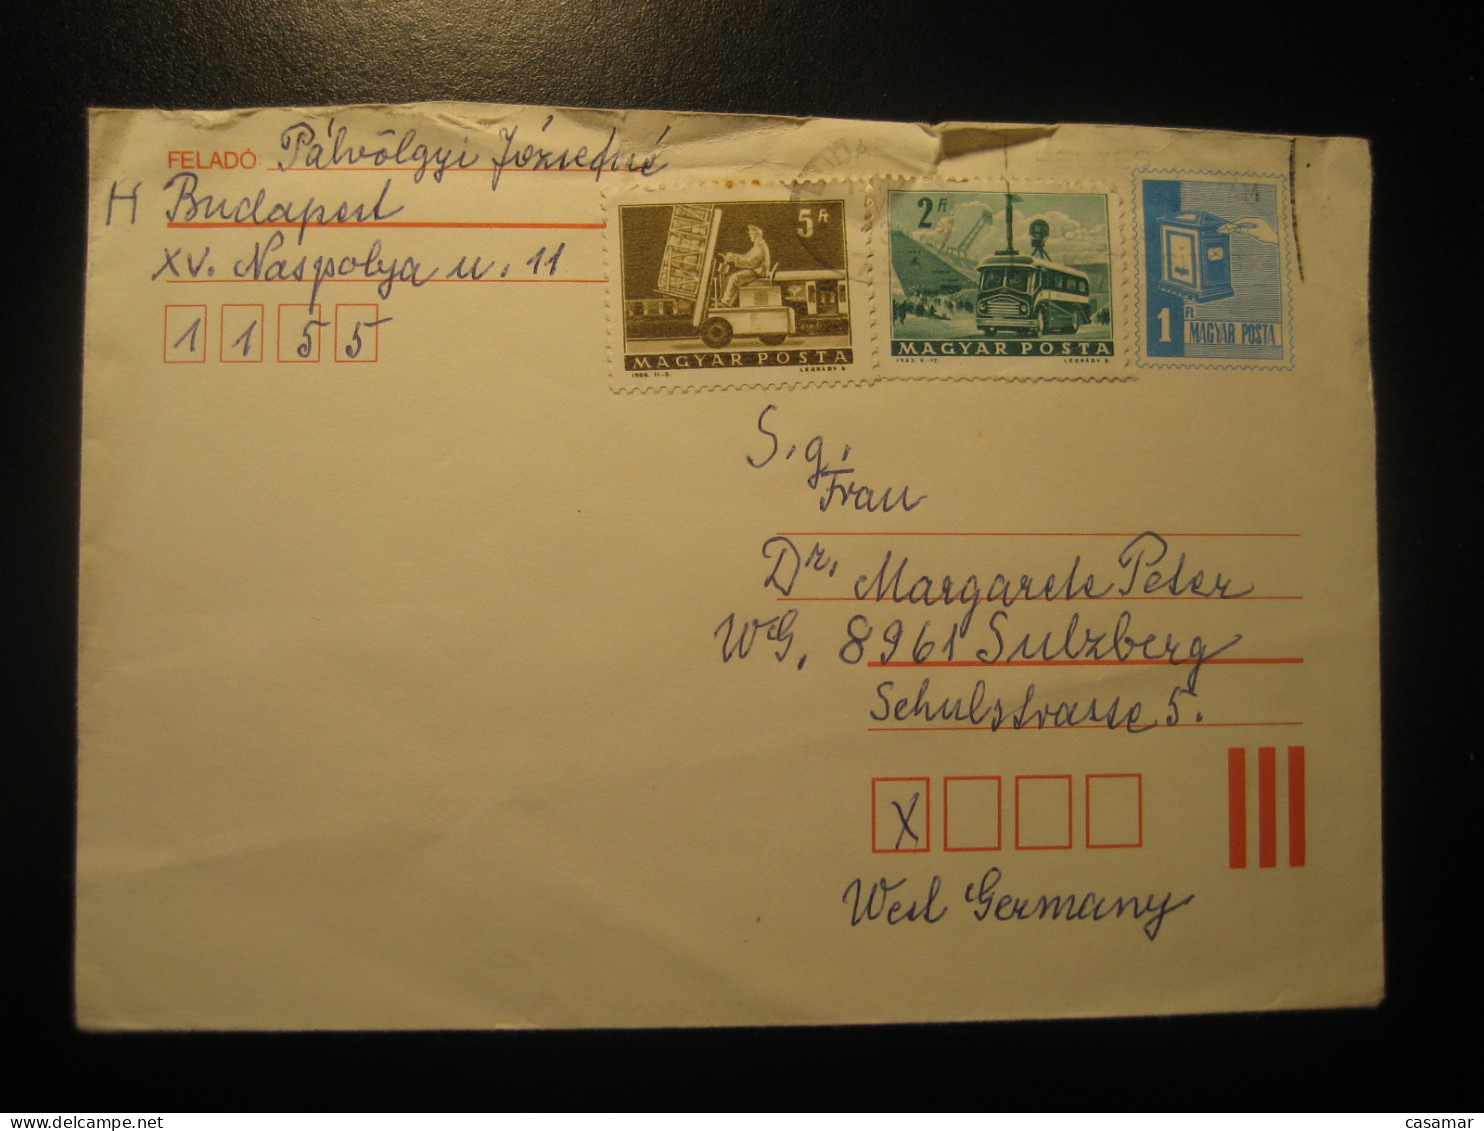 BUDAPEST 1972? To Sulzberg Germany Train Railway Bus Van Truck 2 Stamp On Slight Damaged Cancel Stationery Cover HUNGARY - Covers & Documents